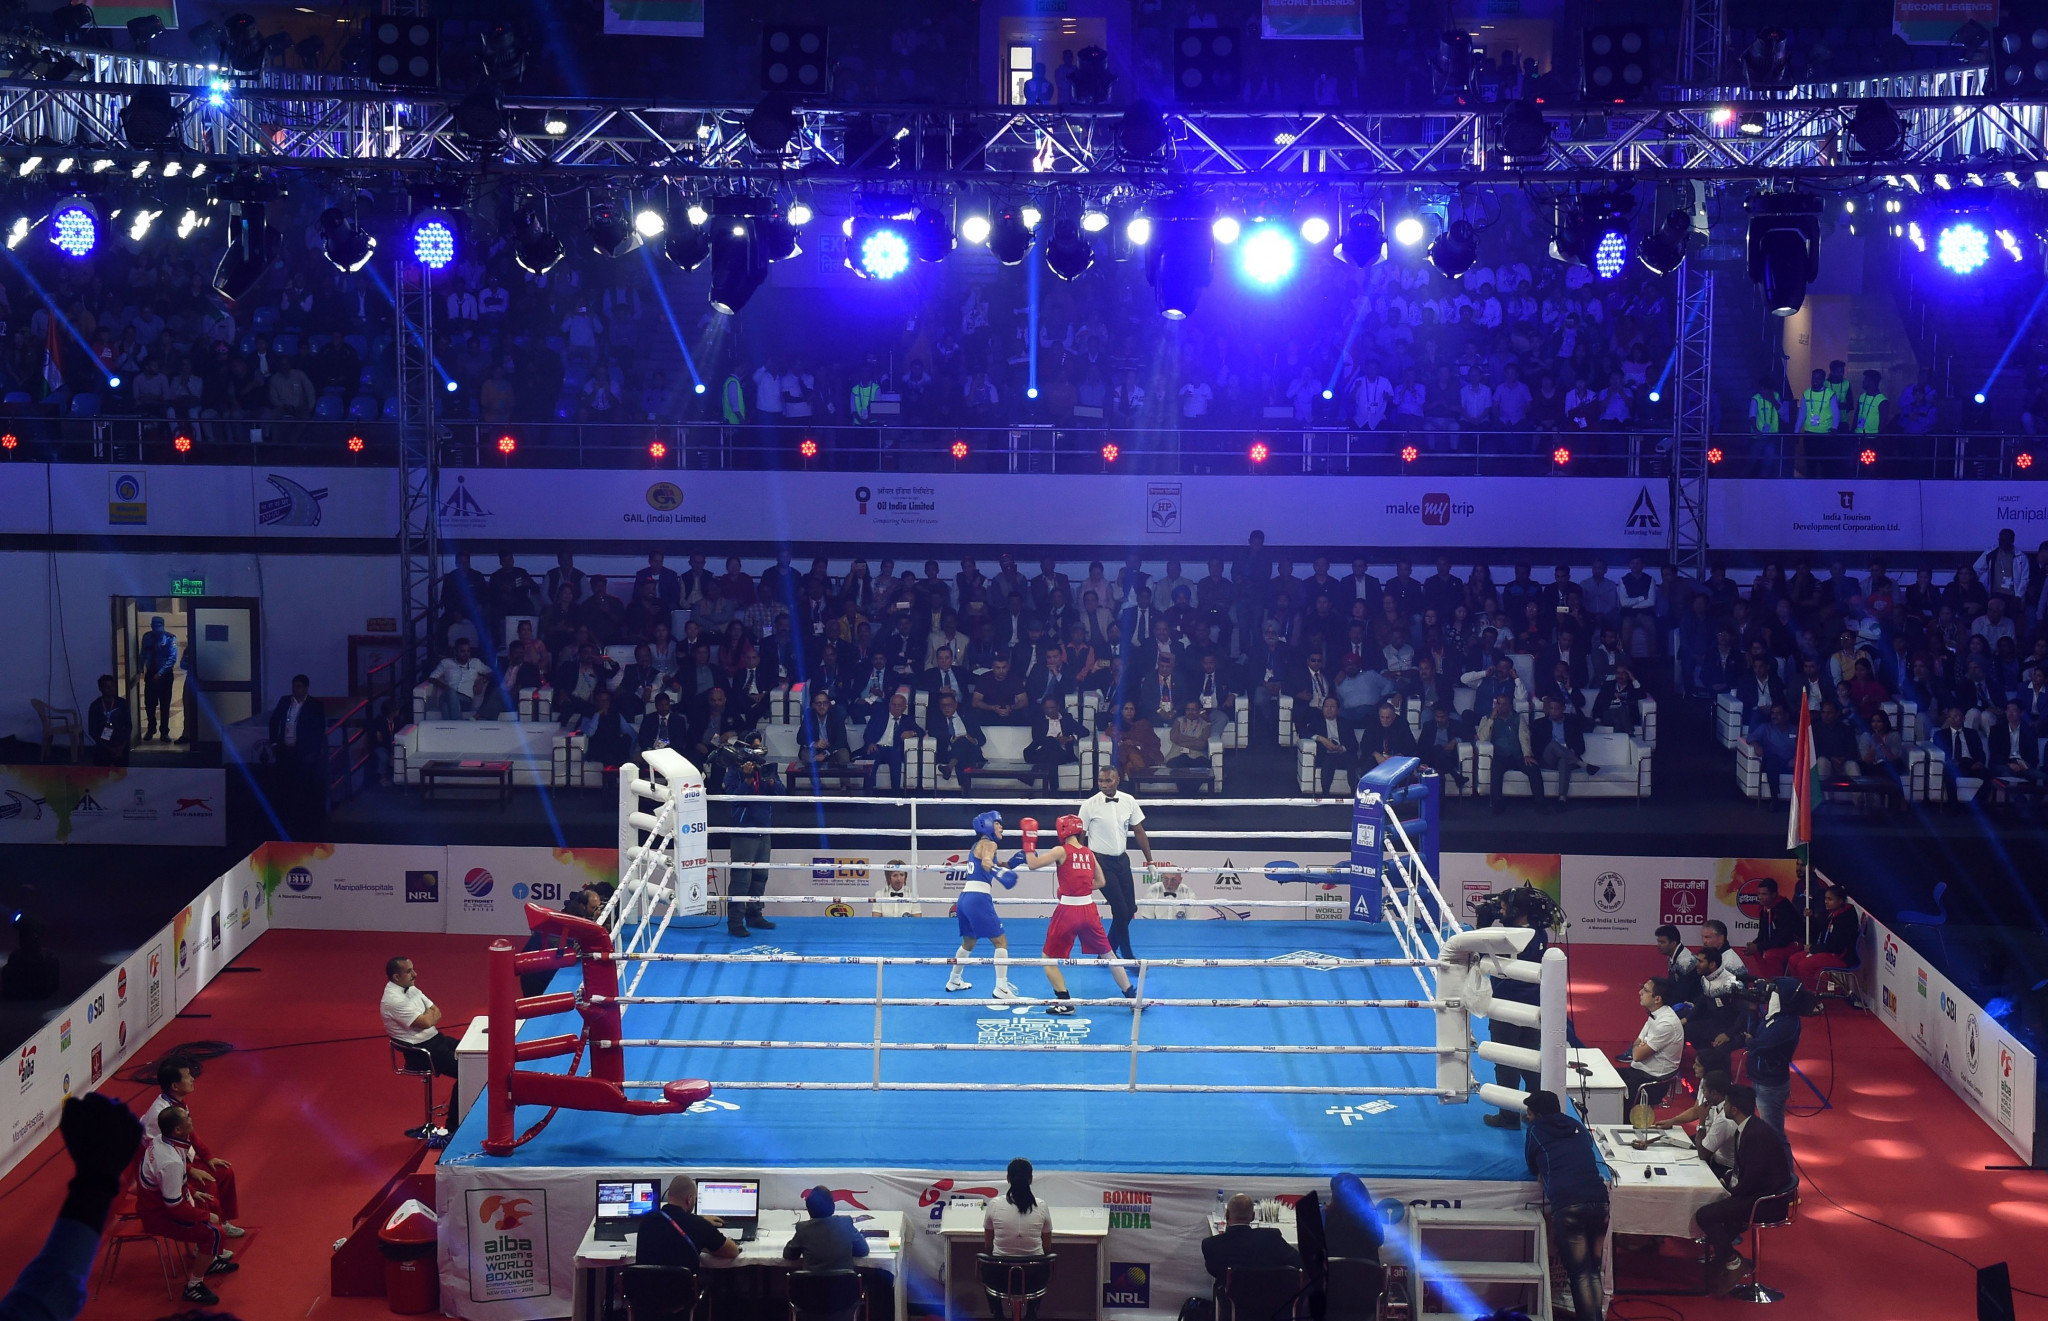 New Delhi was awarded the Women's Boxing World Championships last year, even though Kosovar athletes were denied visas when it was held in India's capital in 2018 ©Getty Images